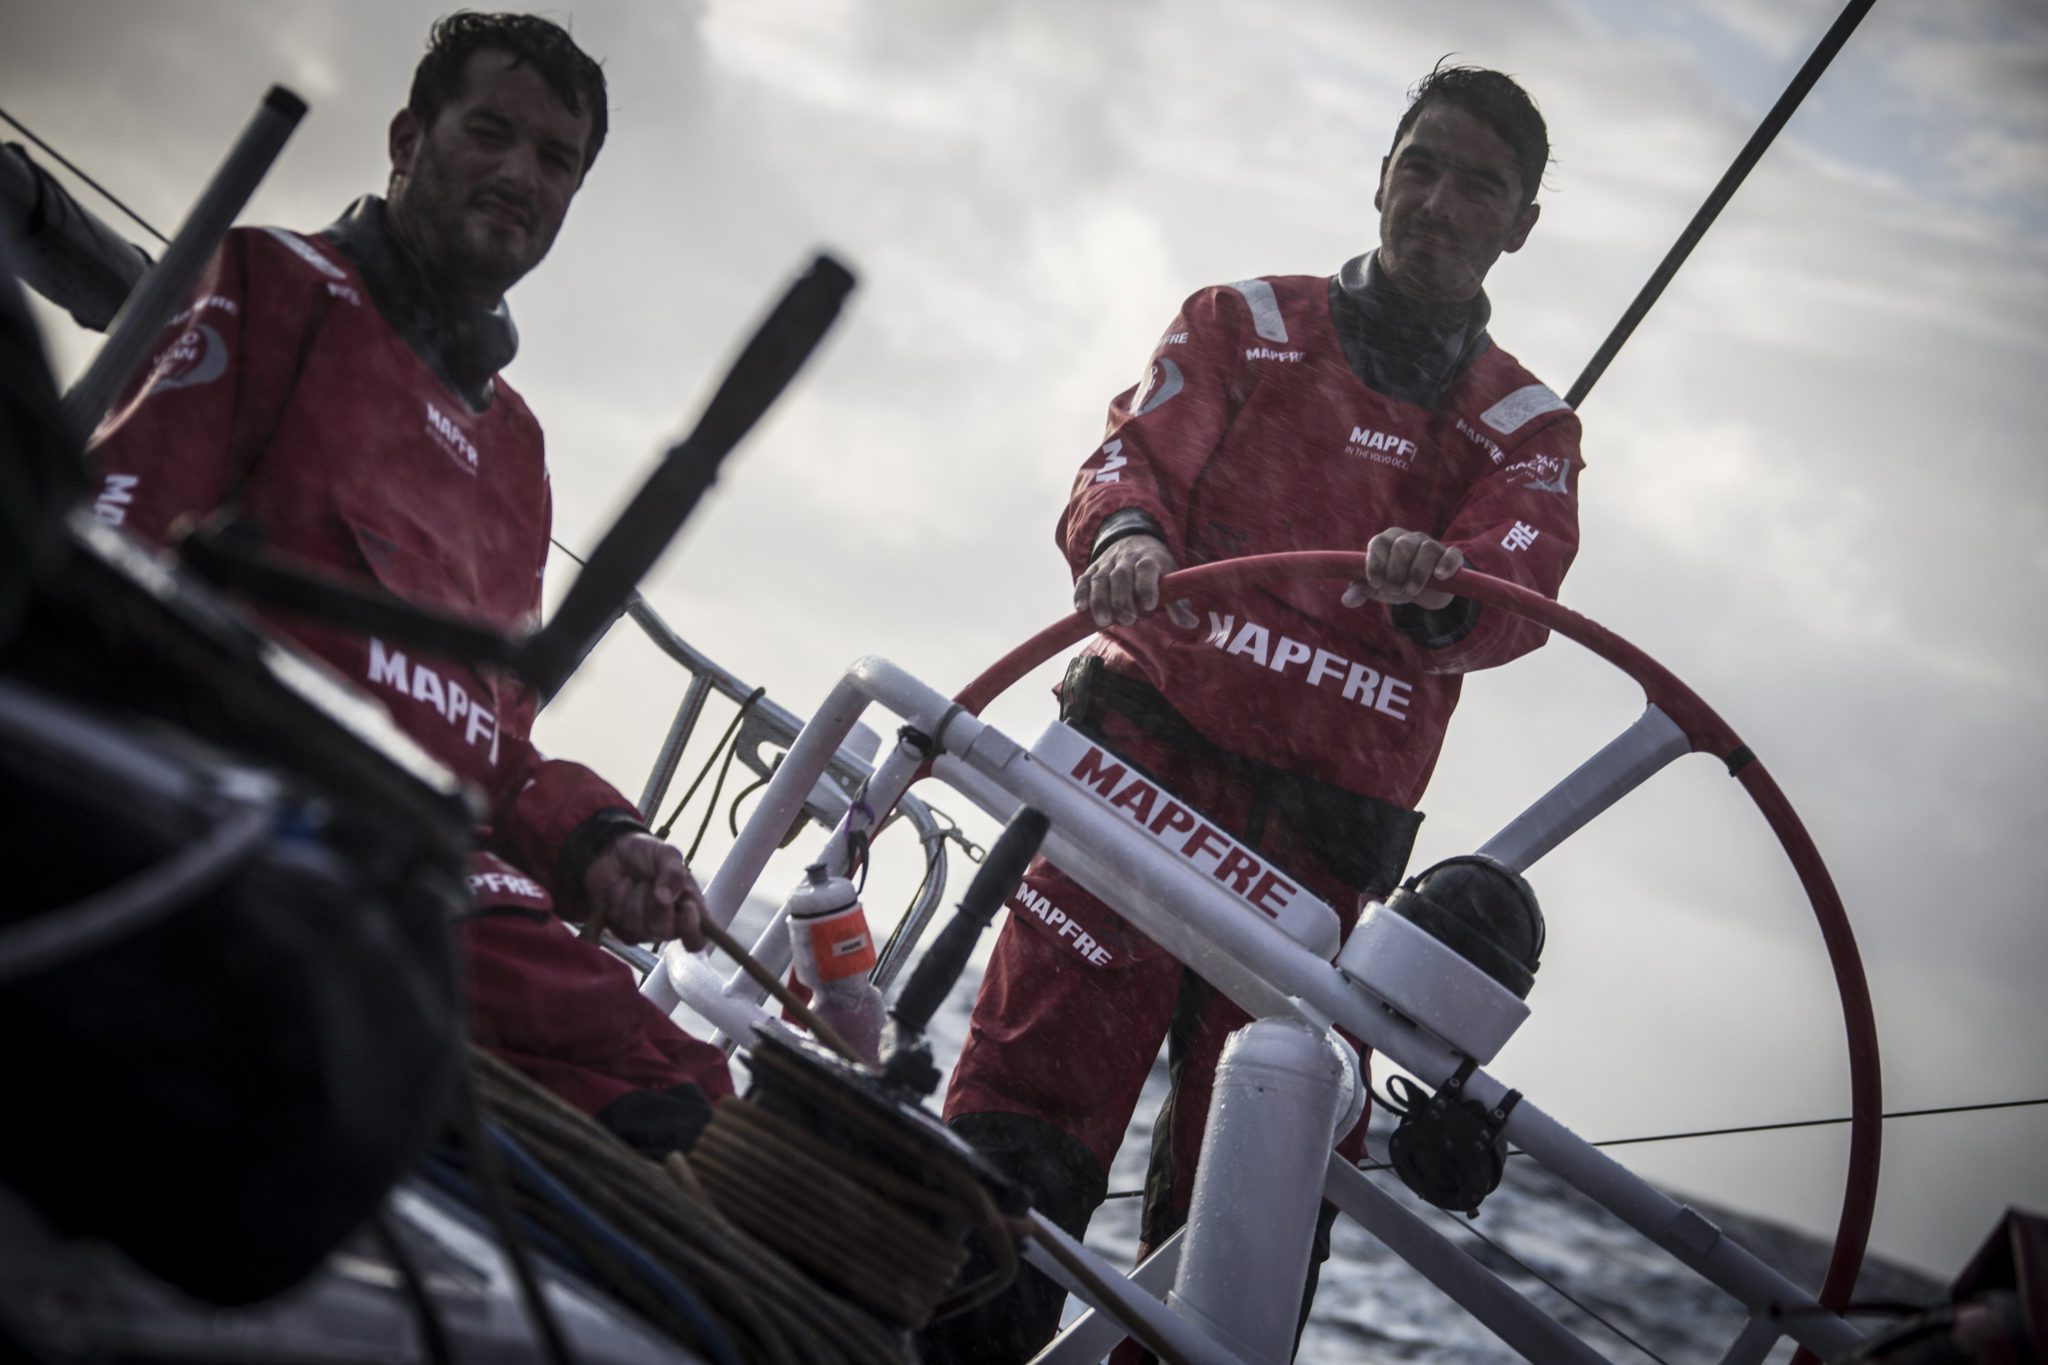 April 29, 2015. Leg 6 to Newport onboard MAPFRE. Day 10. Andre Fonseca, aka Bochecha, and Carlos Hernandez early this morning.